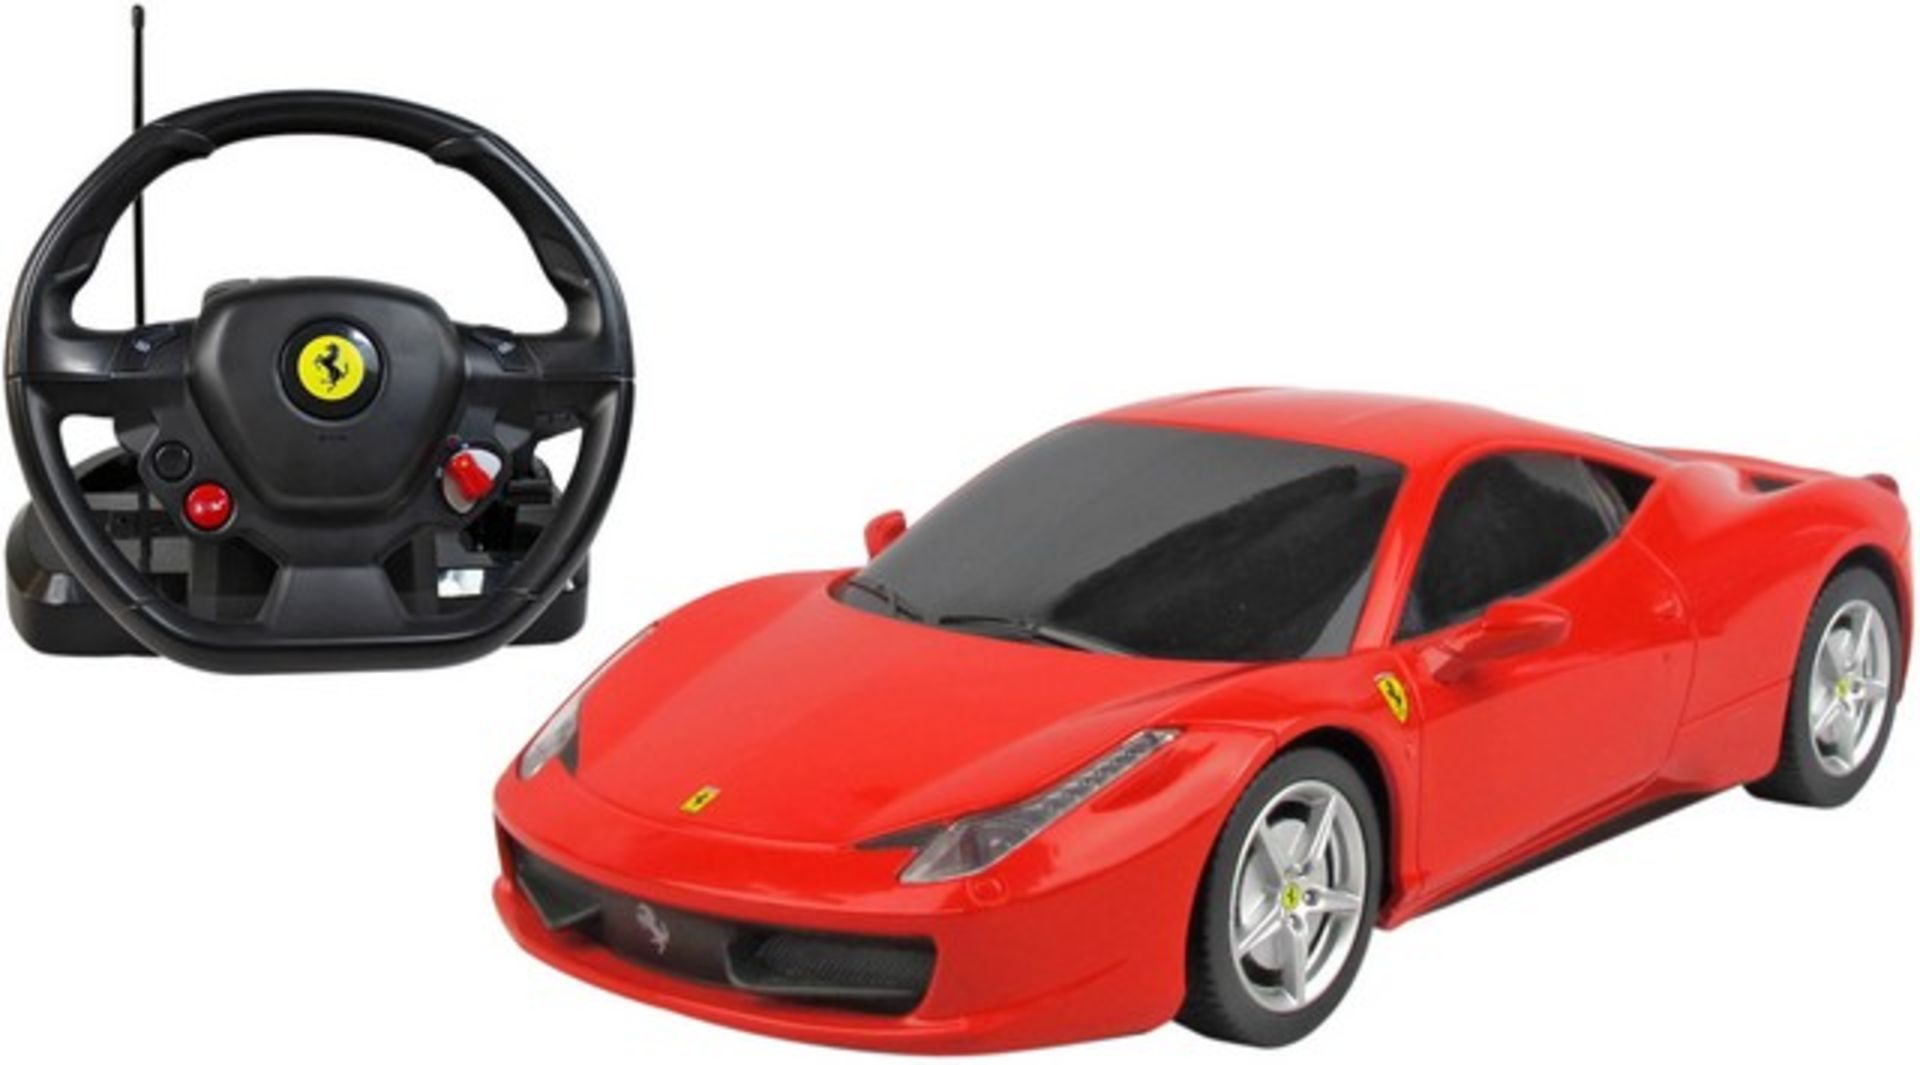 V Brand New 1/18 RC Ferrari 458 Italia With Sound and Steering Wheel Controller - Official